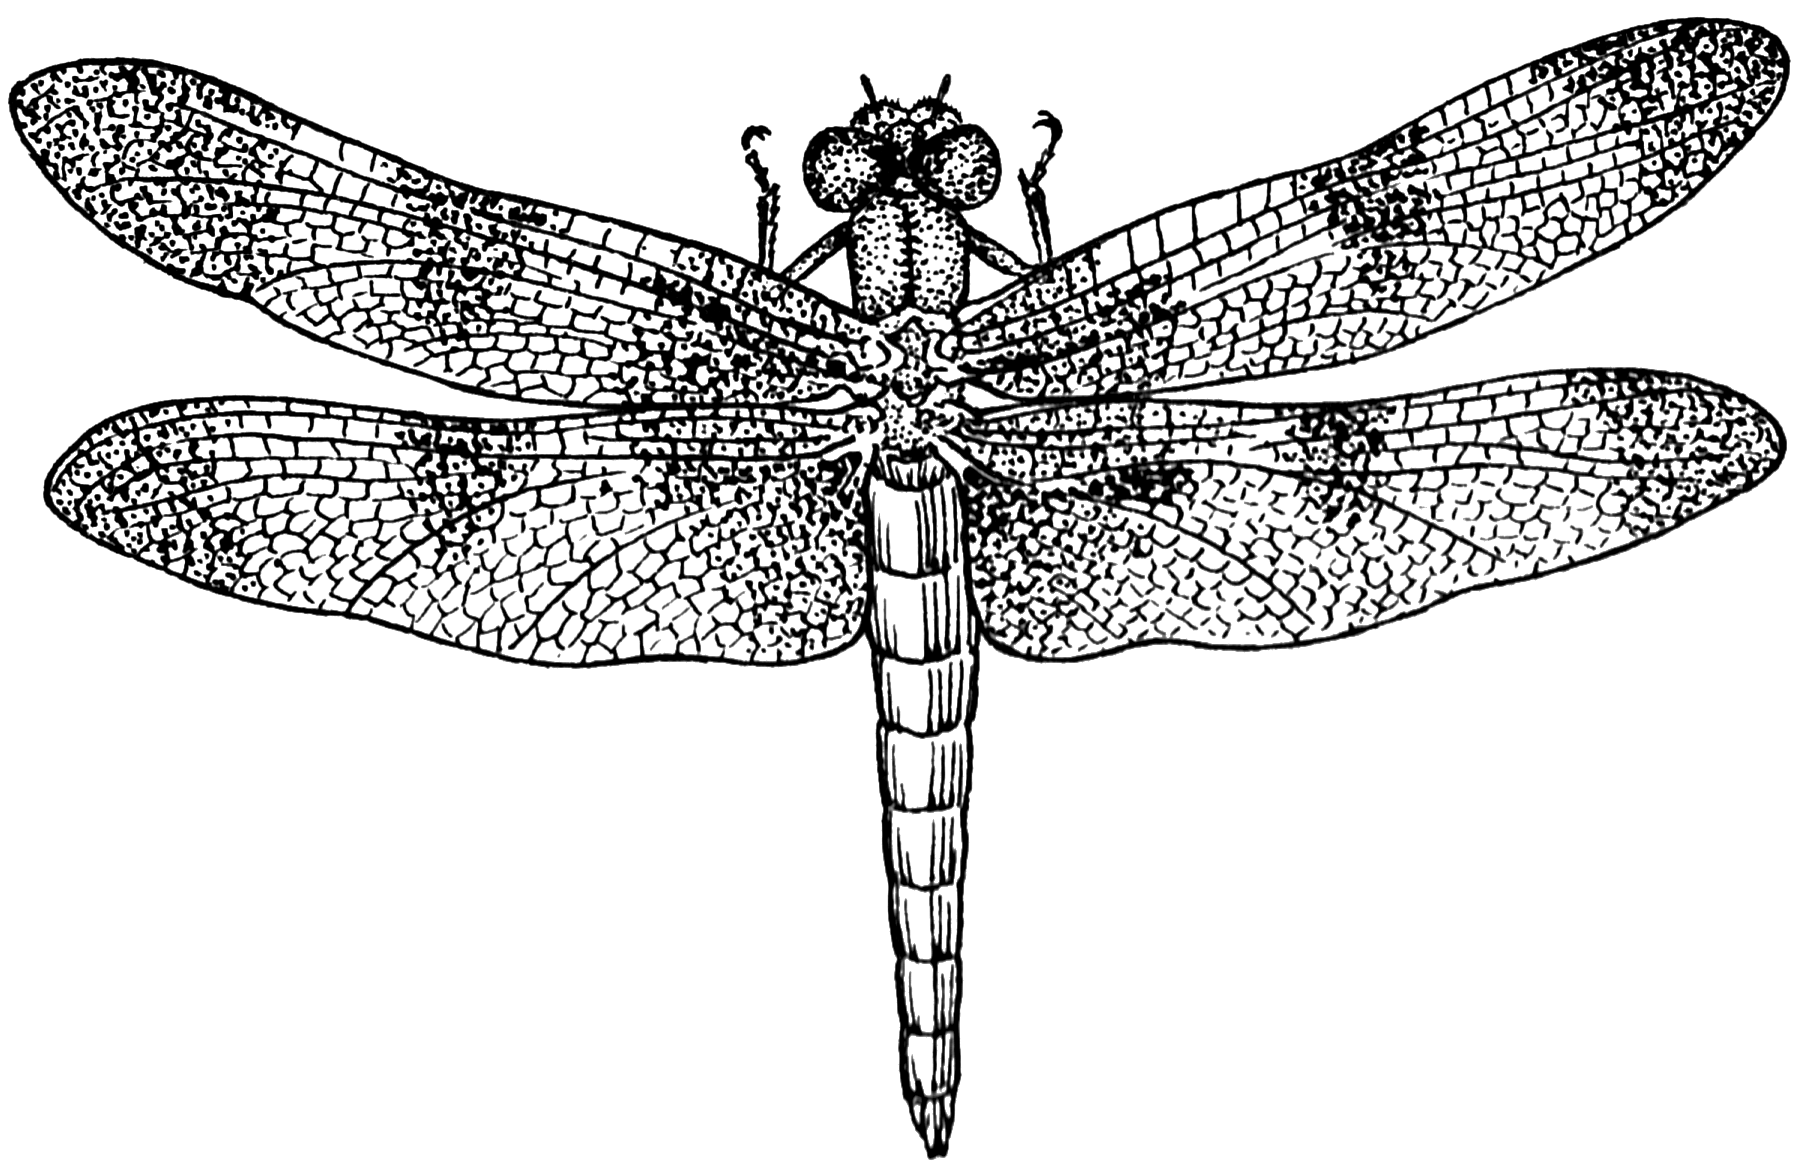 File:PSF-Dragonfly.png - Wikimedia Commons